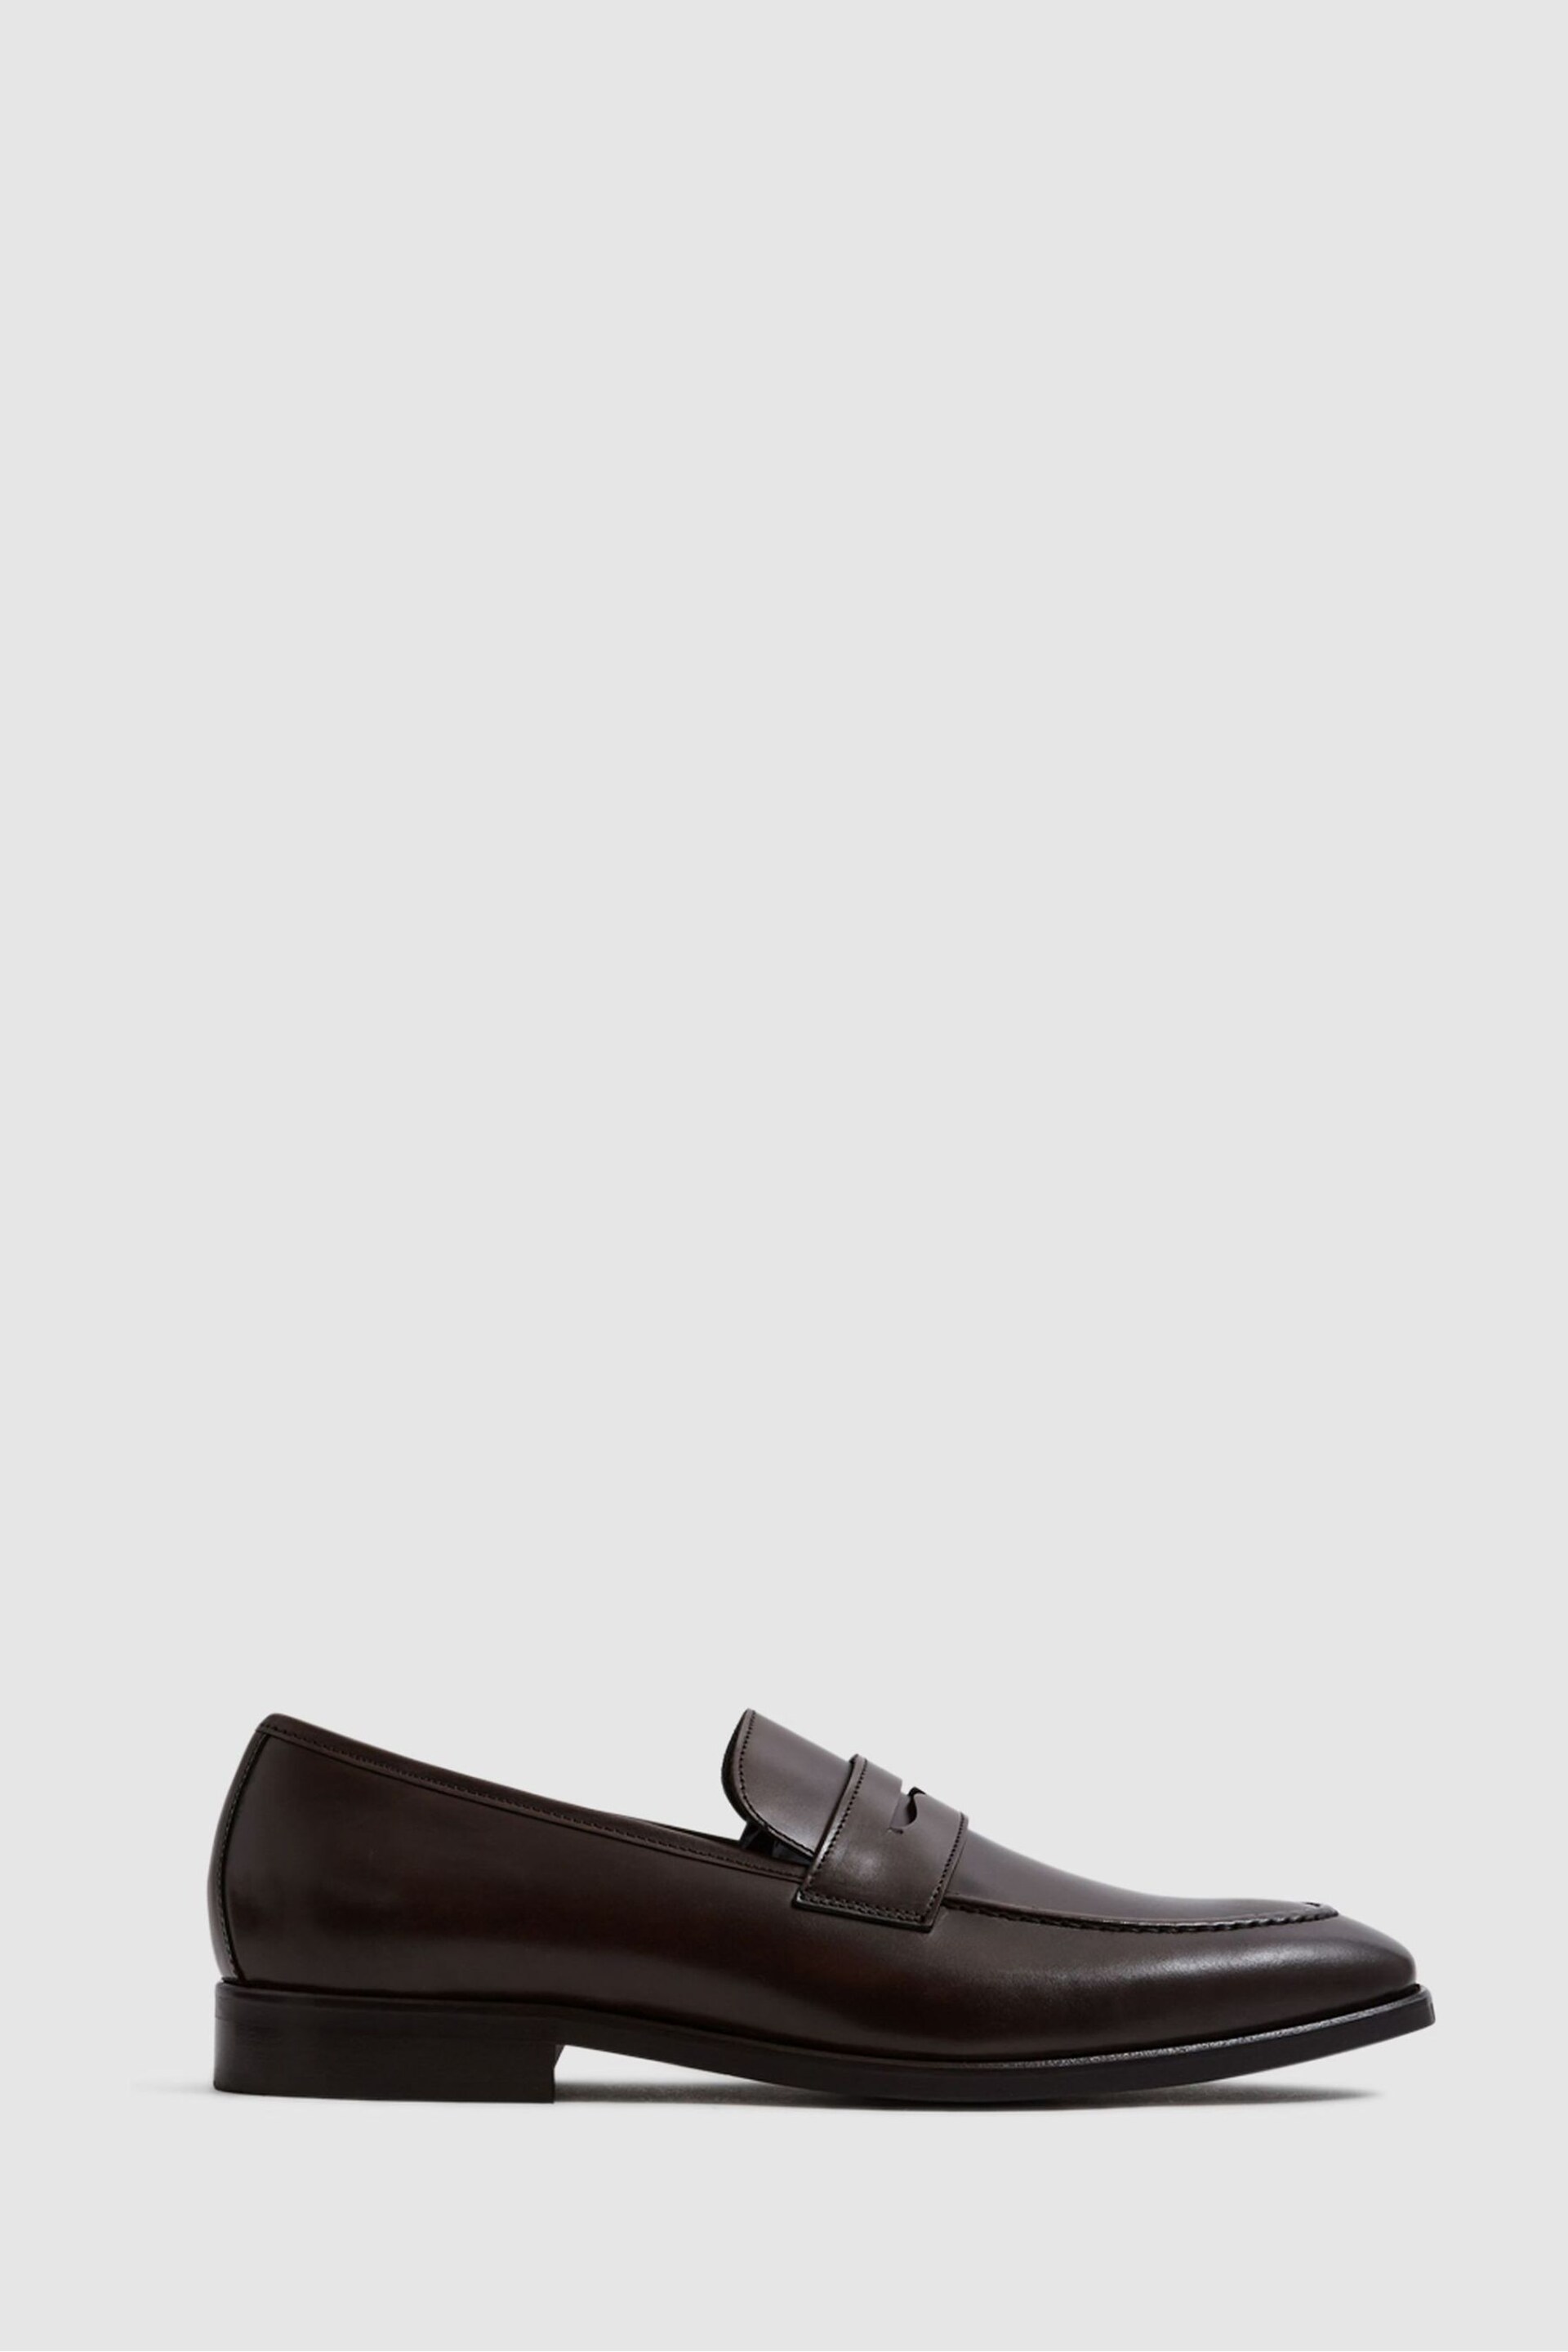 Reiss Brown Grafton Leather Saddle Loafers - Image 1 of 6